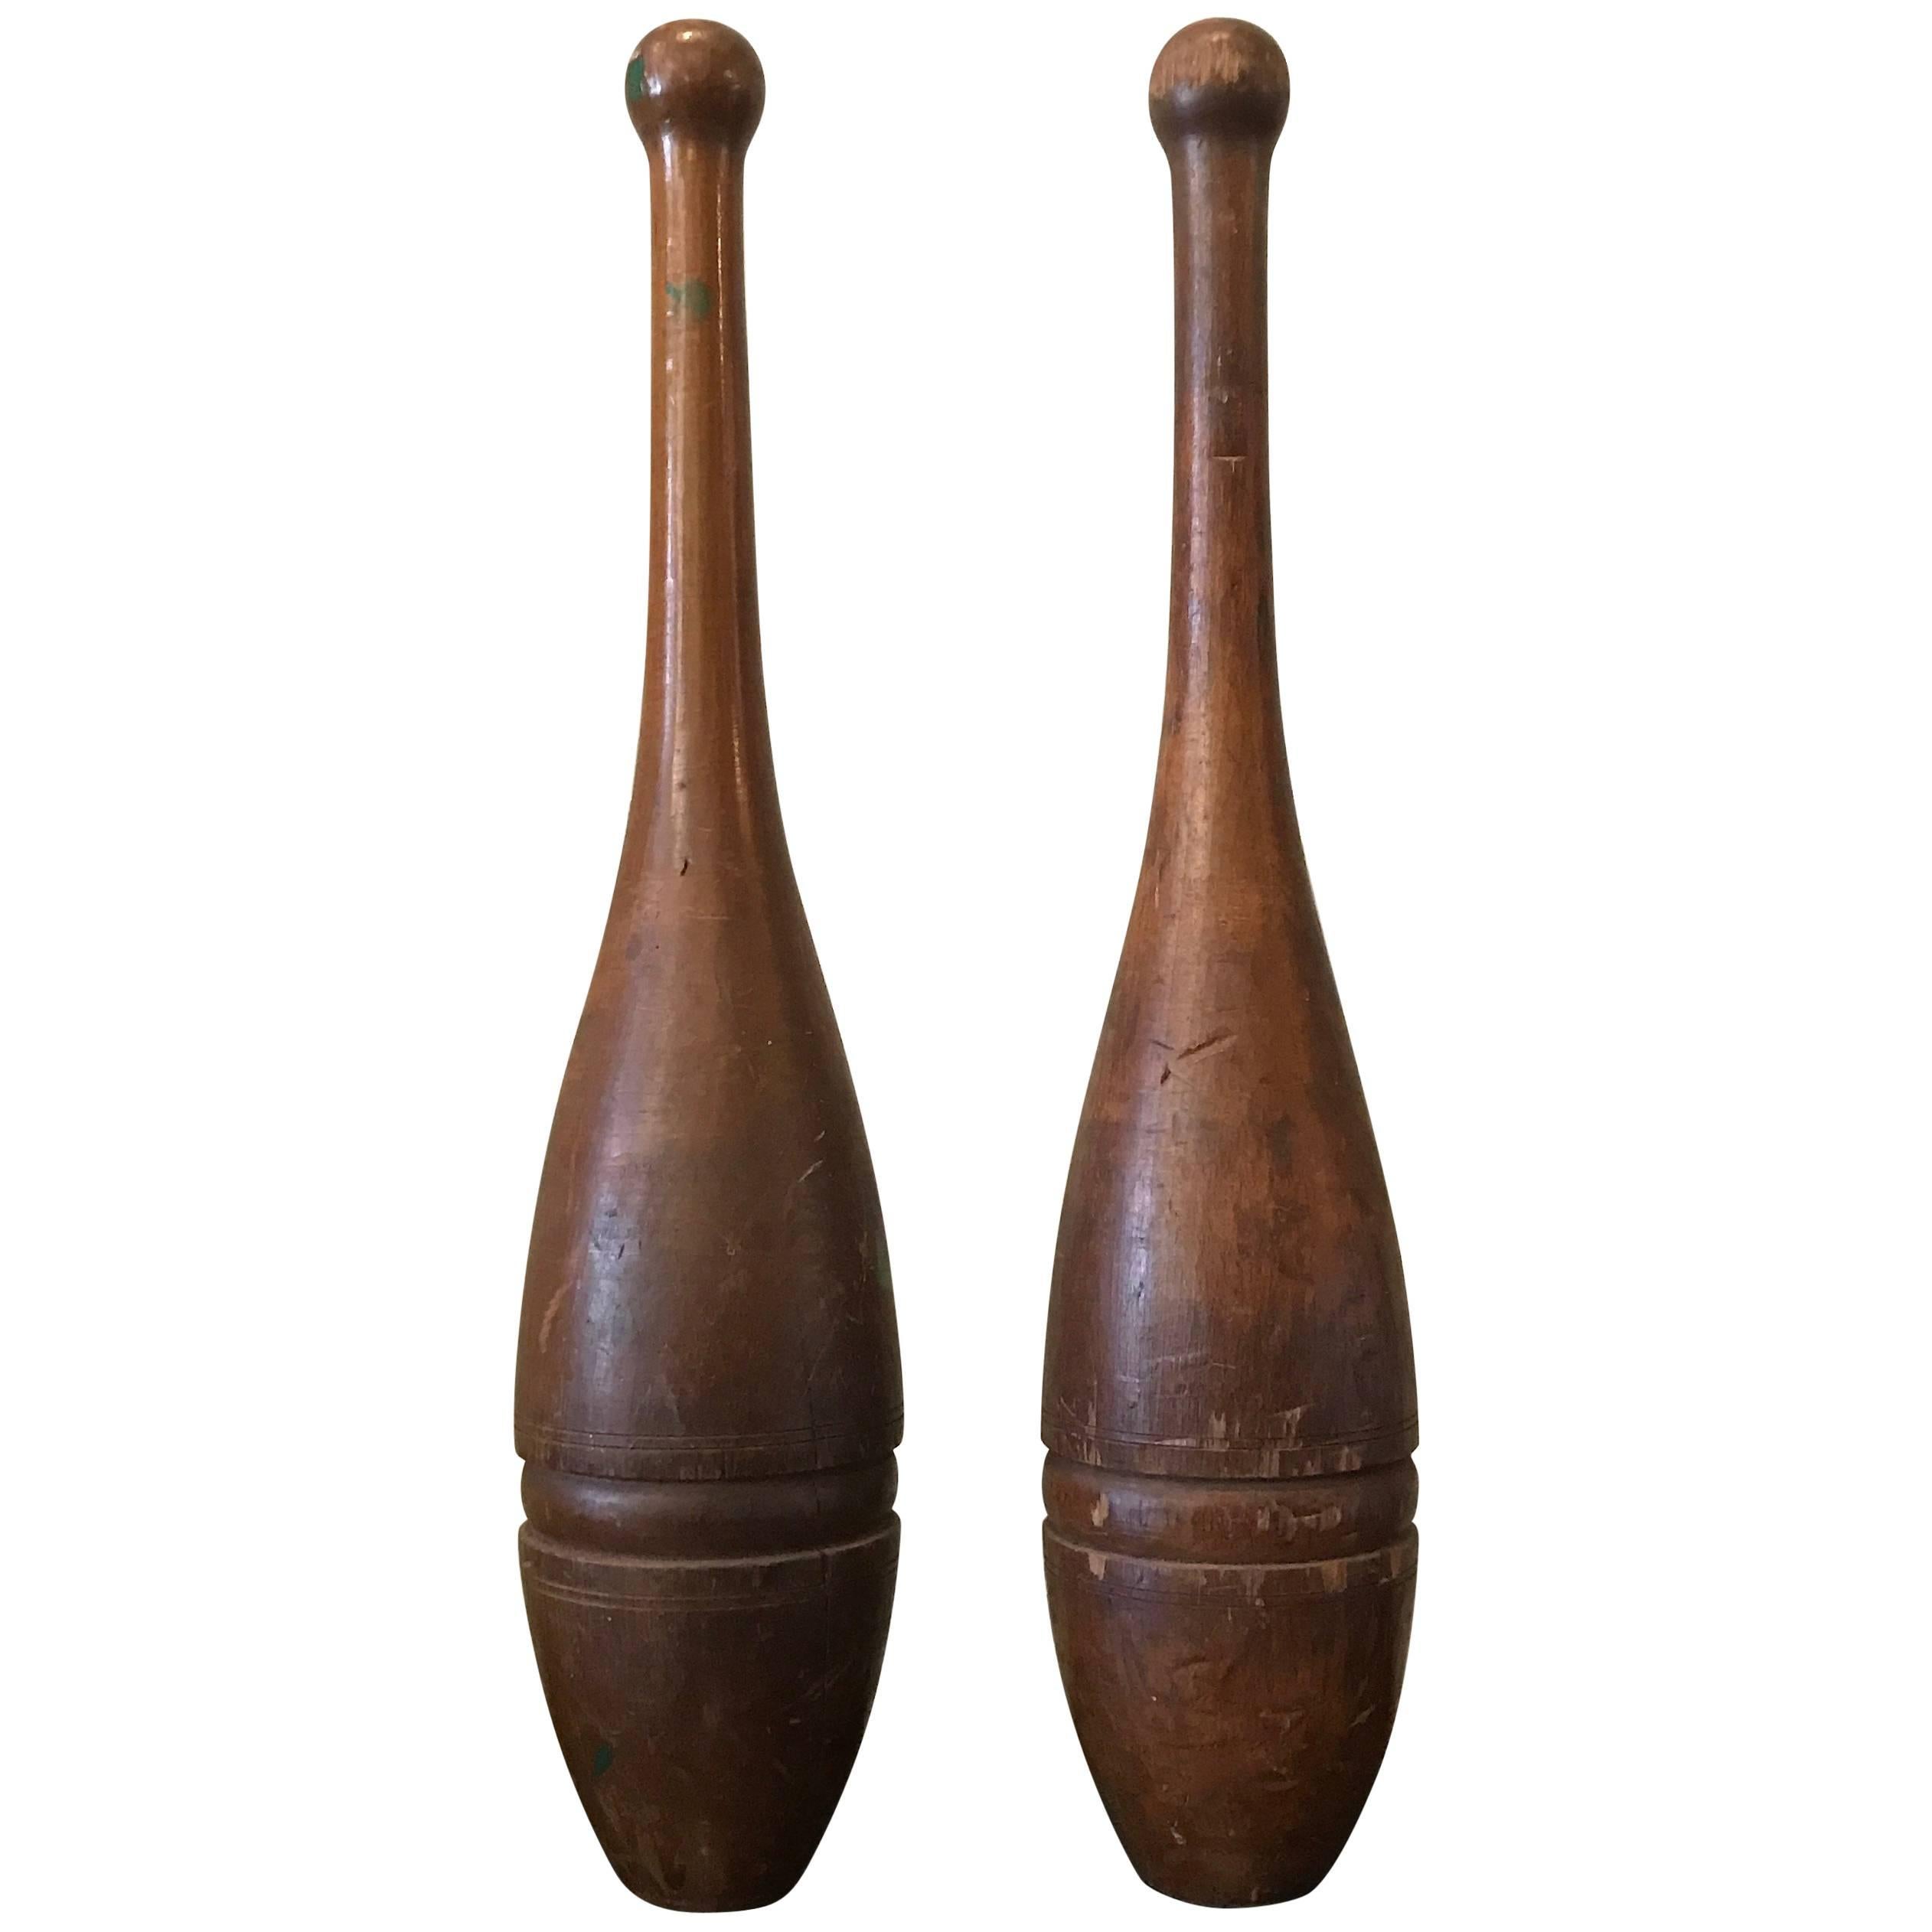 Pair of Early 20th Century Stained Maple Juggling Pins